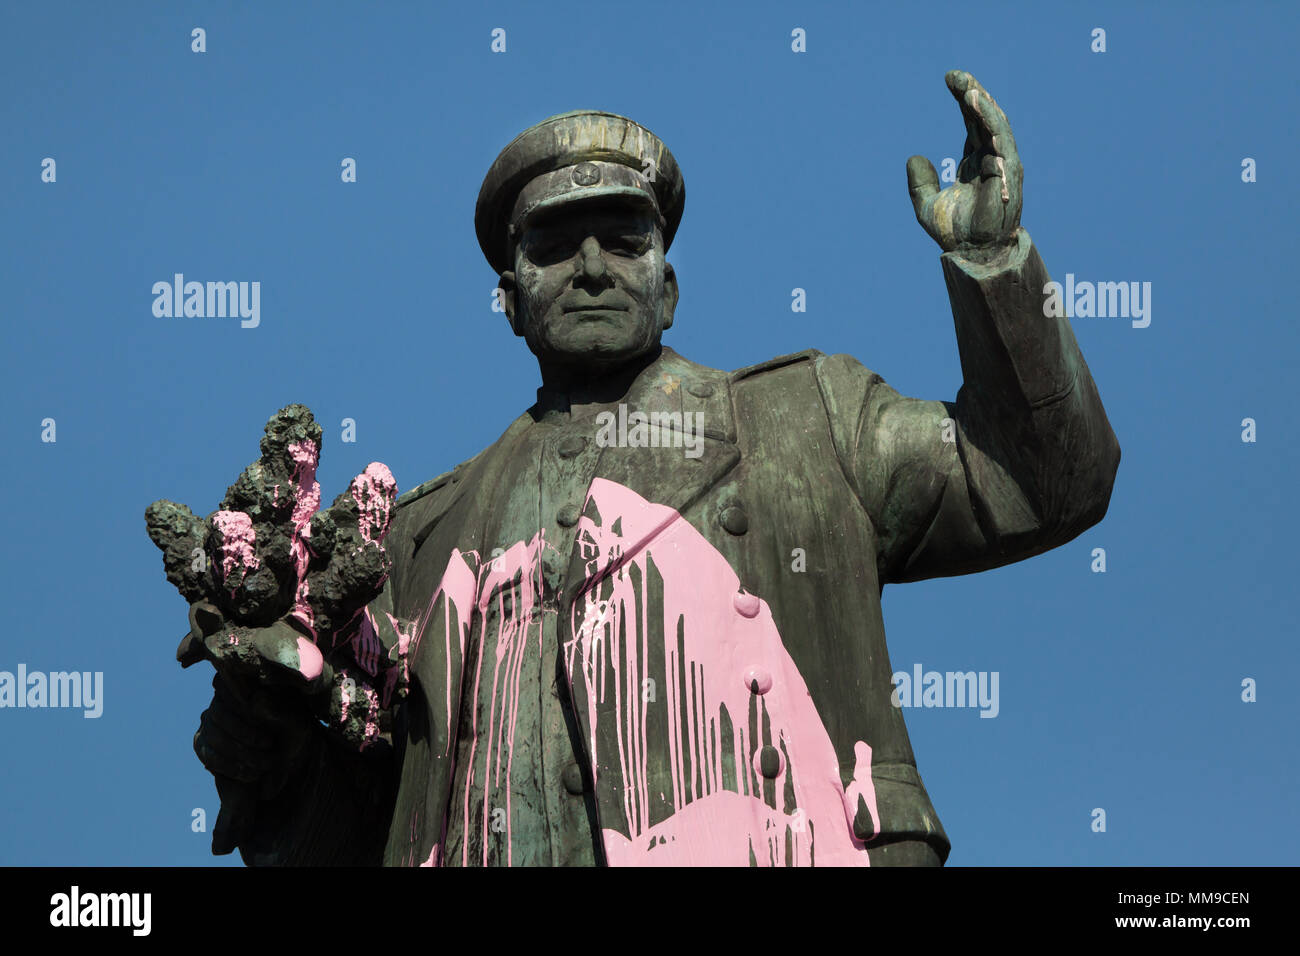 Monument to Soviet military commander Ivan Konev vandalized with pink paint in Prague, Czech Republic, on 8 May 2018. Bronze statue by Czech sculptor Zdeněk Krybus was unveiled in 1980 in Dejvice district to commemorate the liberation of Prague by the 1st Ukrainian Front of the Red Army under command of Ivan Konev in May 1945 in the last days of World War II. Stock Photo